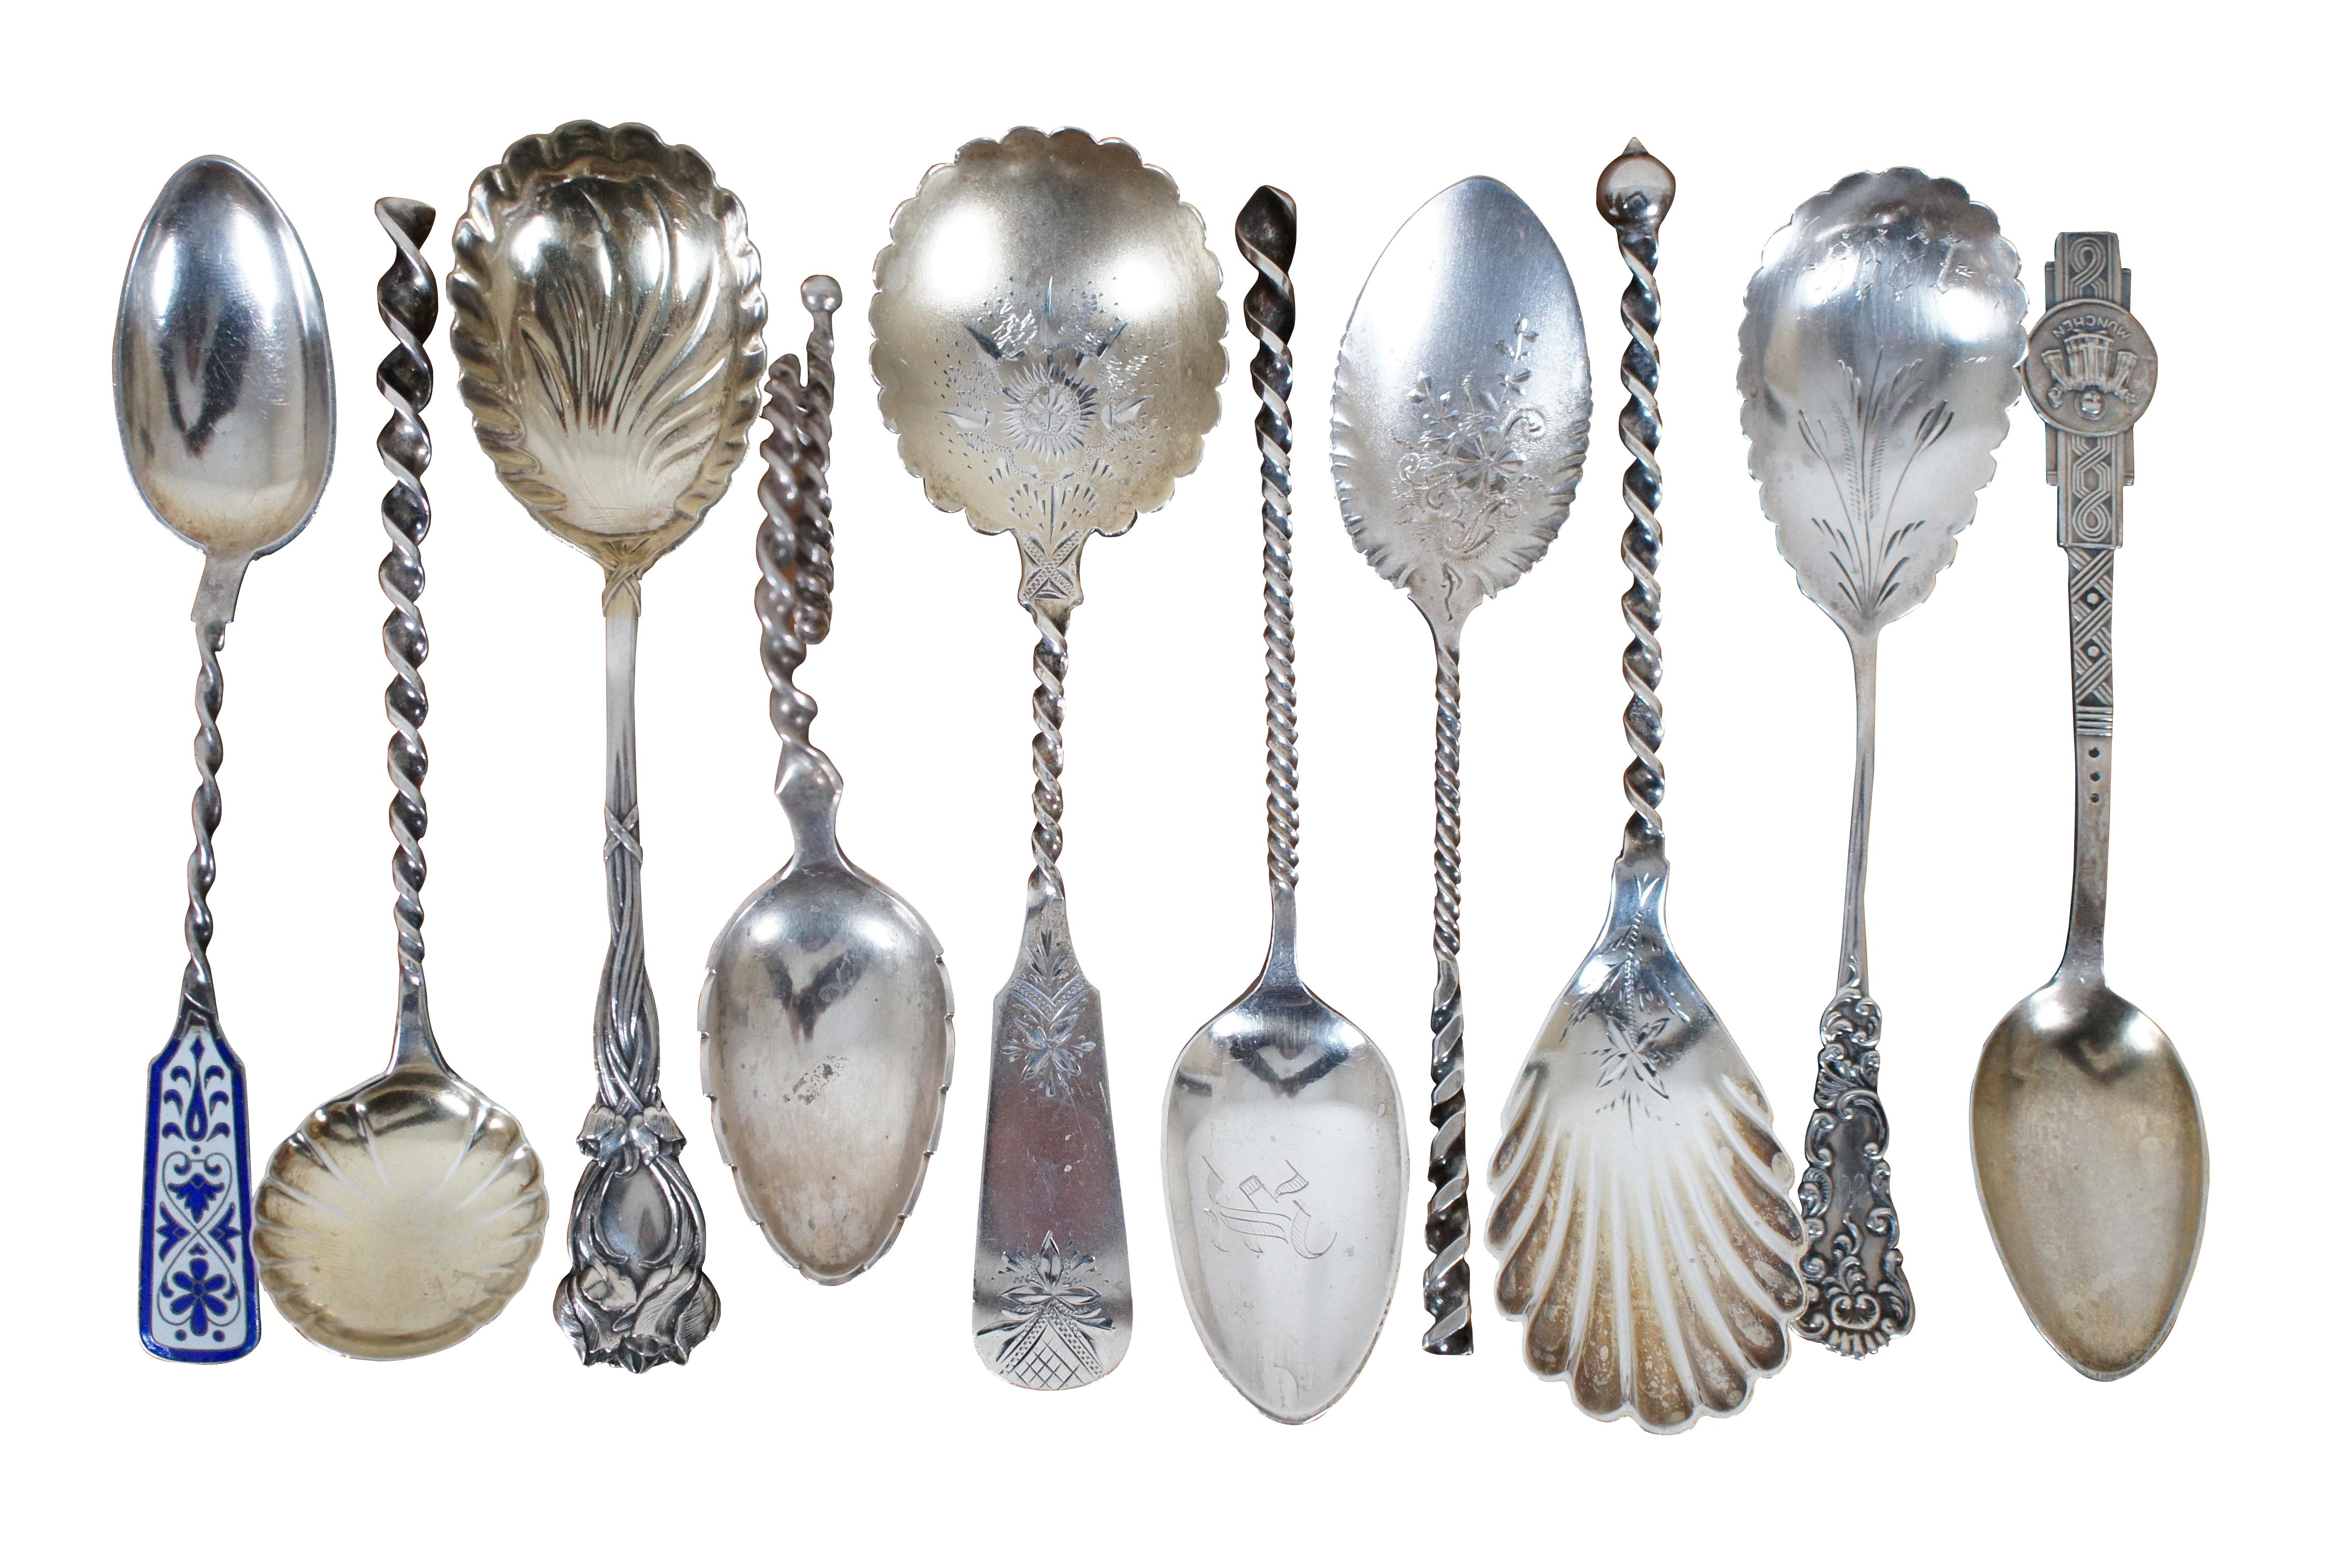 Lot of 10 antique sterling and one 800 silver sugar / tea spoons in a variety of styles and designs including shell bowls, twisted handles, floral motifs and one enameled. Makers include Whiting Mfg Co, Towle Sterling, William B Kerr & Co, Davis &